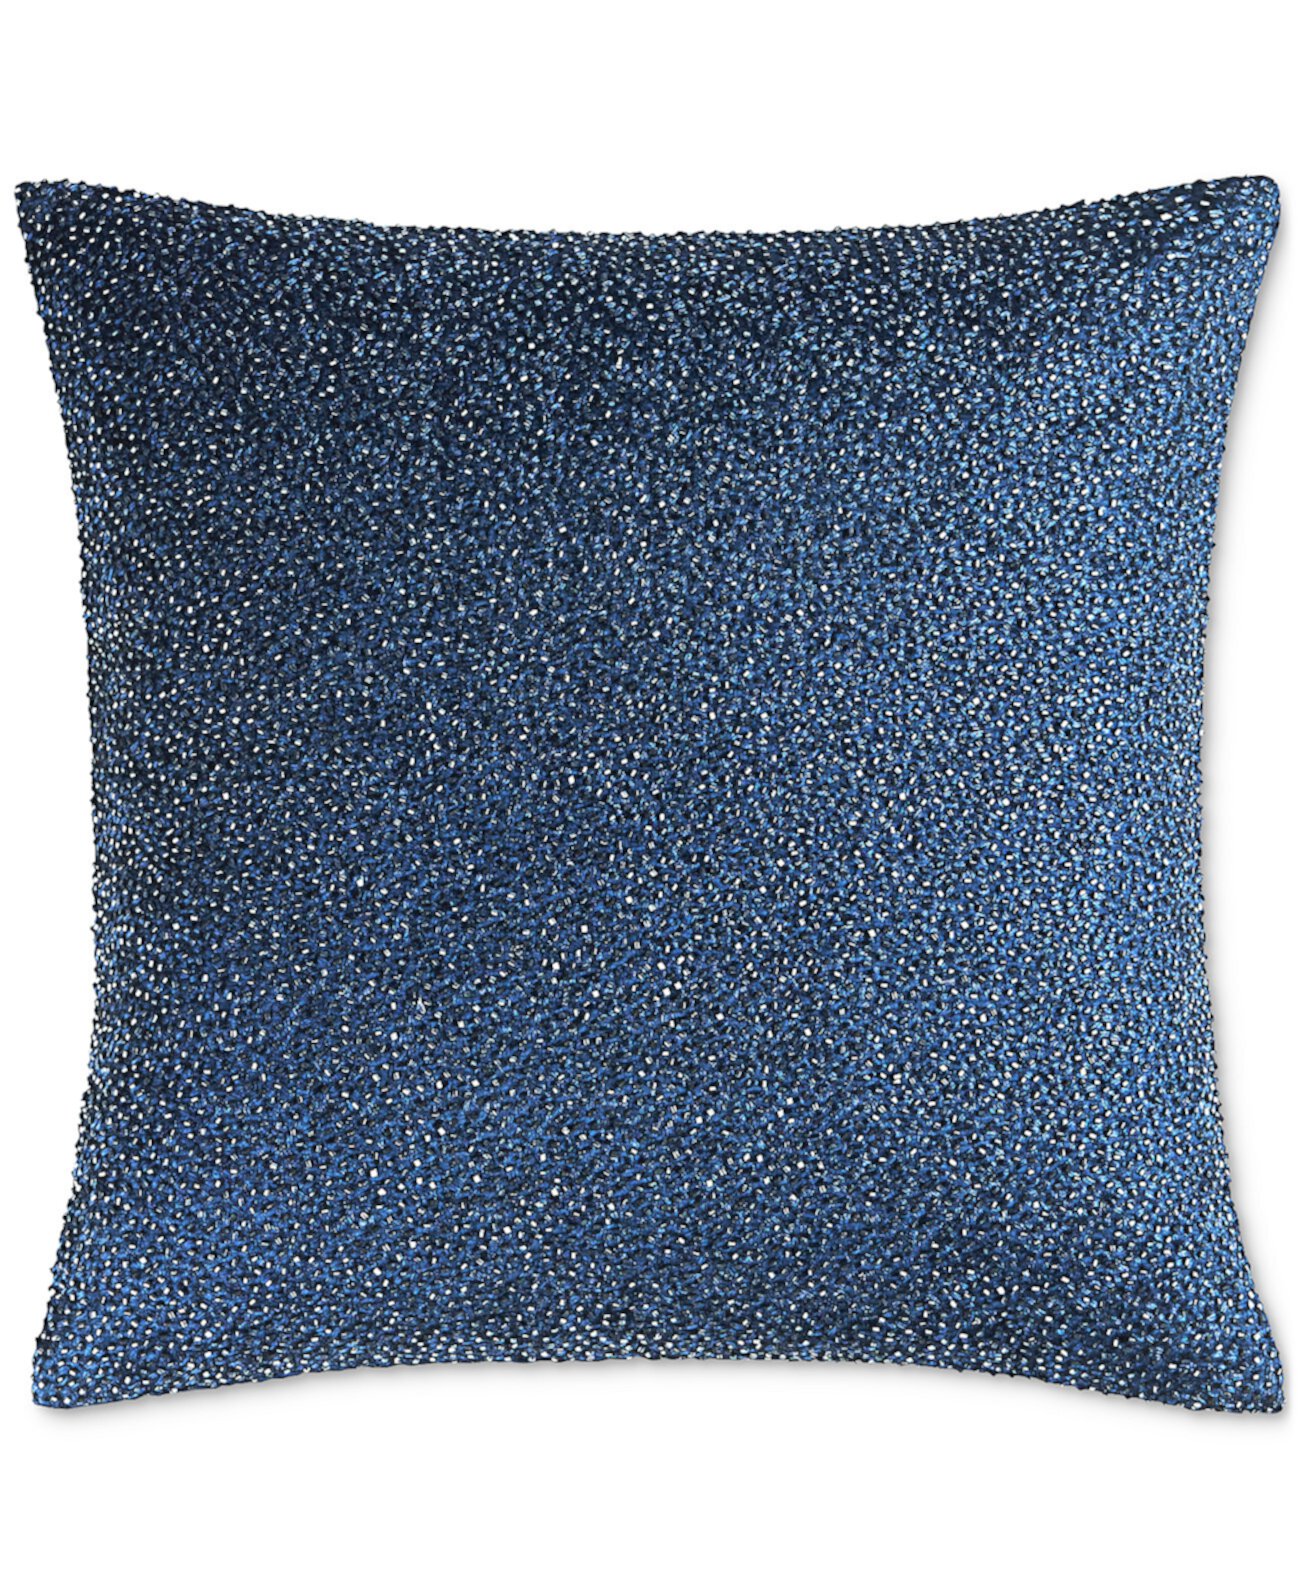 Glint Decorative Pillow, 18" x 18", Created for Macy's Hotel Collection